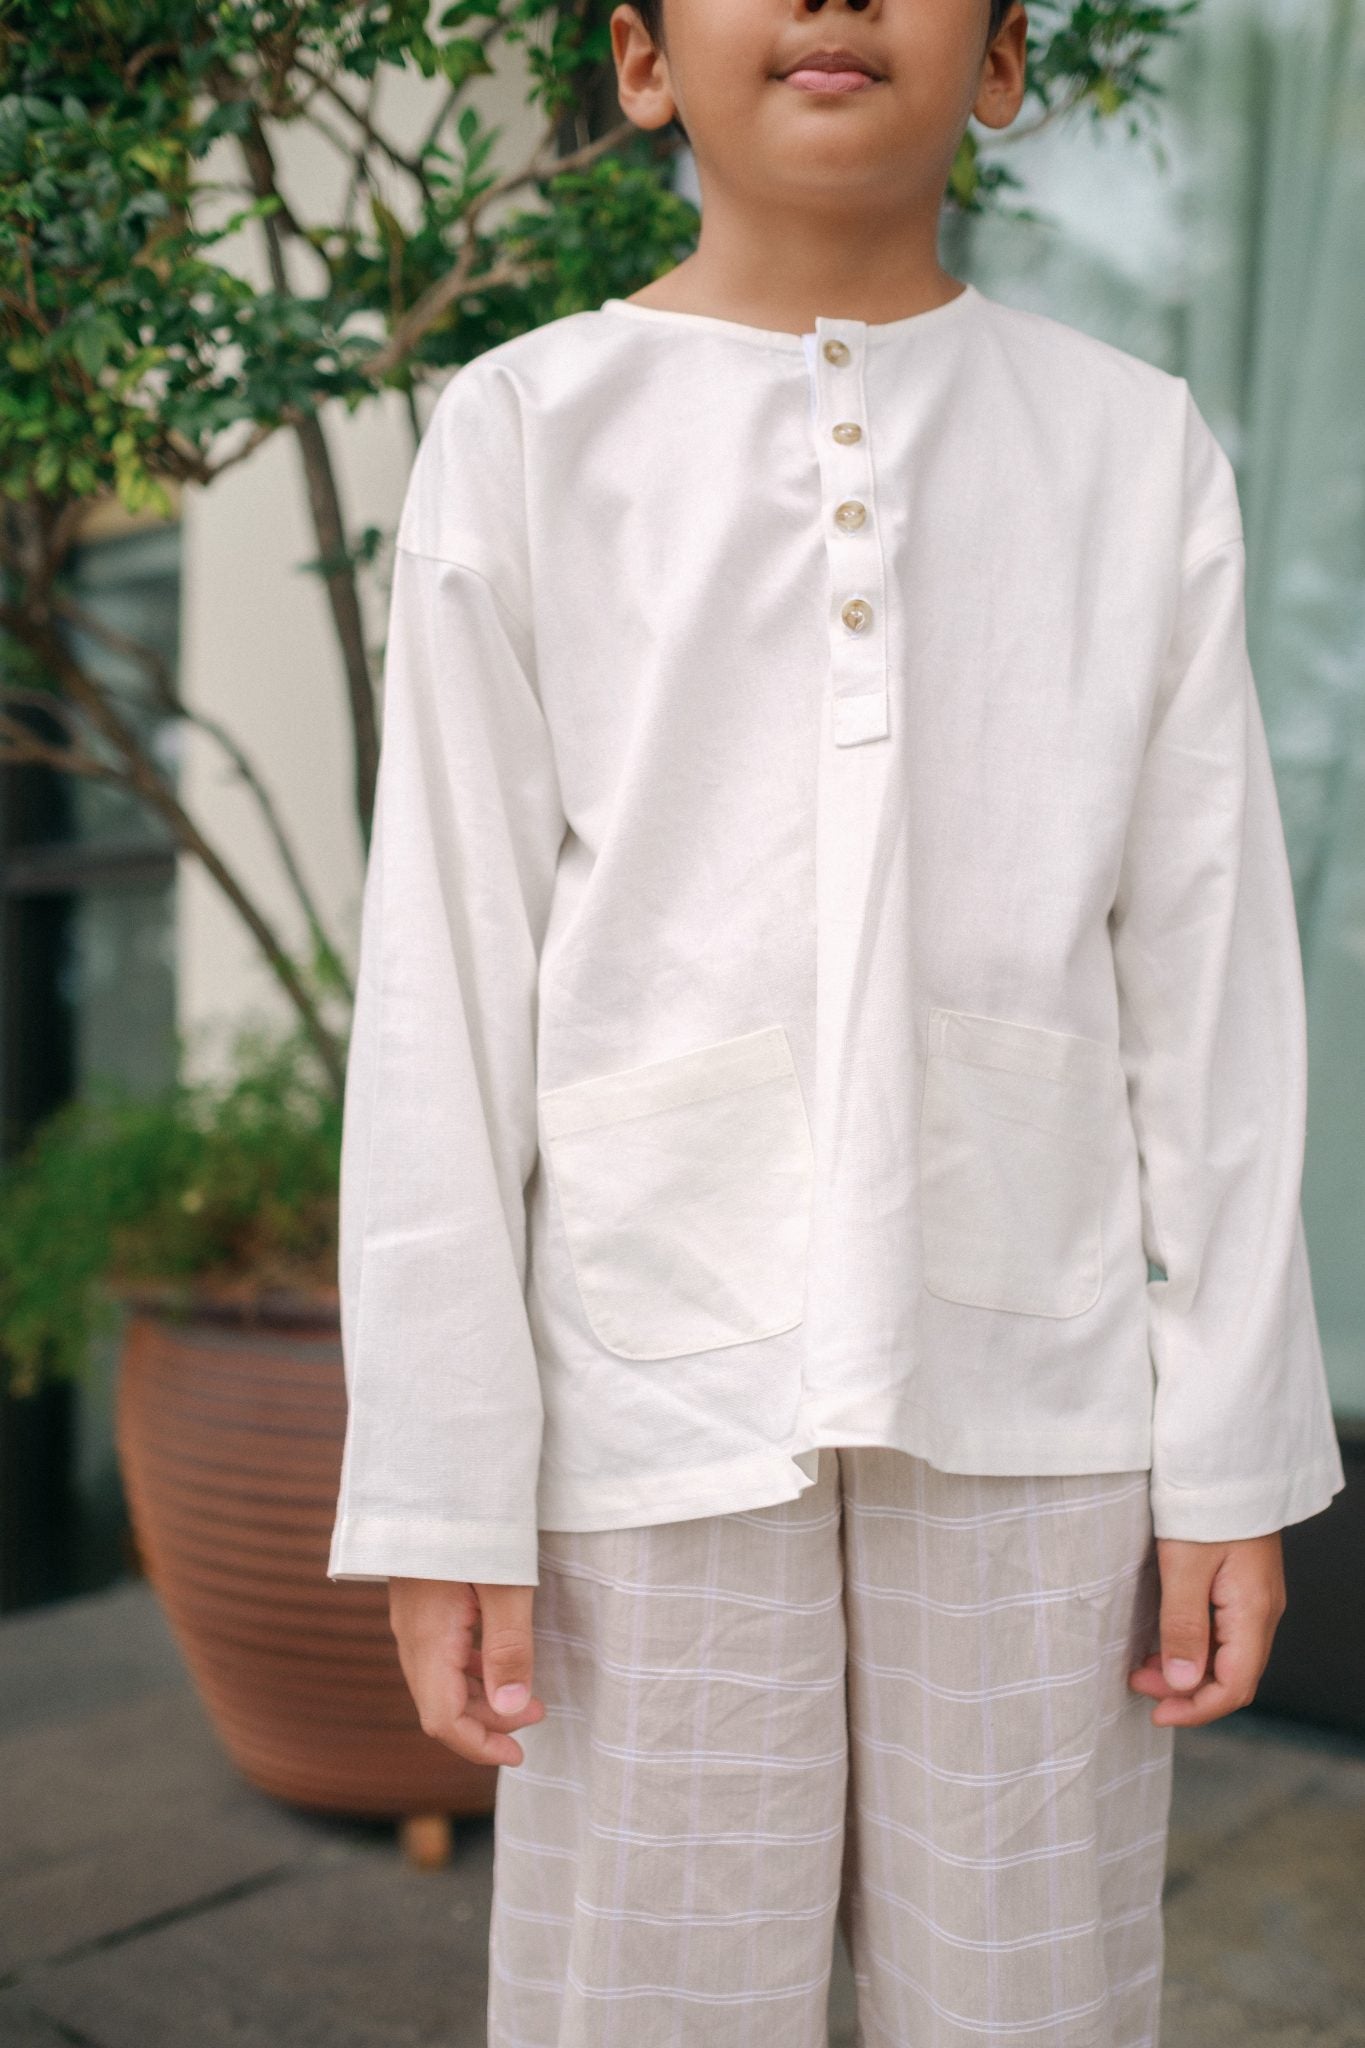 Boy in high quality modern kurta in white. Made by petit moi 